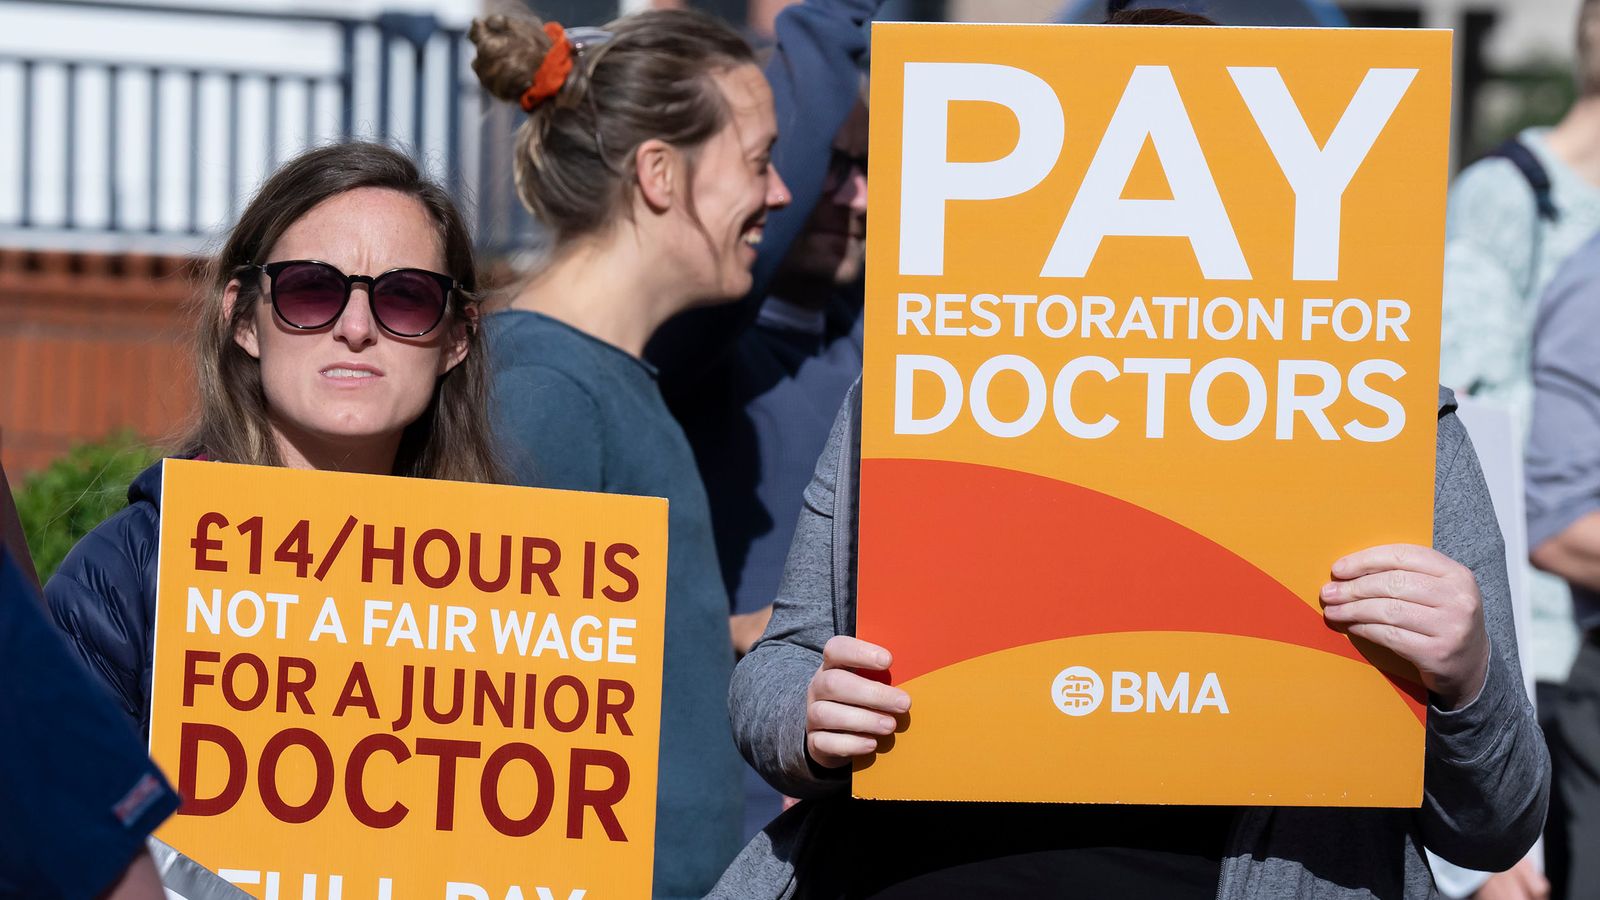 Junior doctors 'not exceptional' when it comes to impact of inflation, says minister